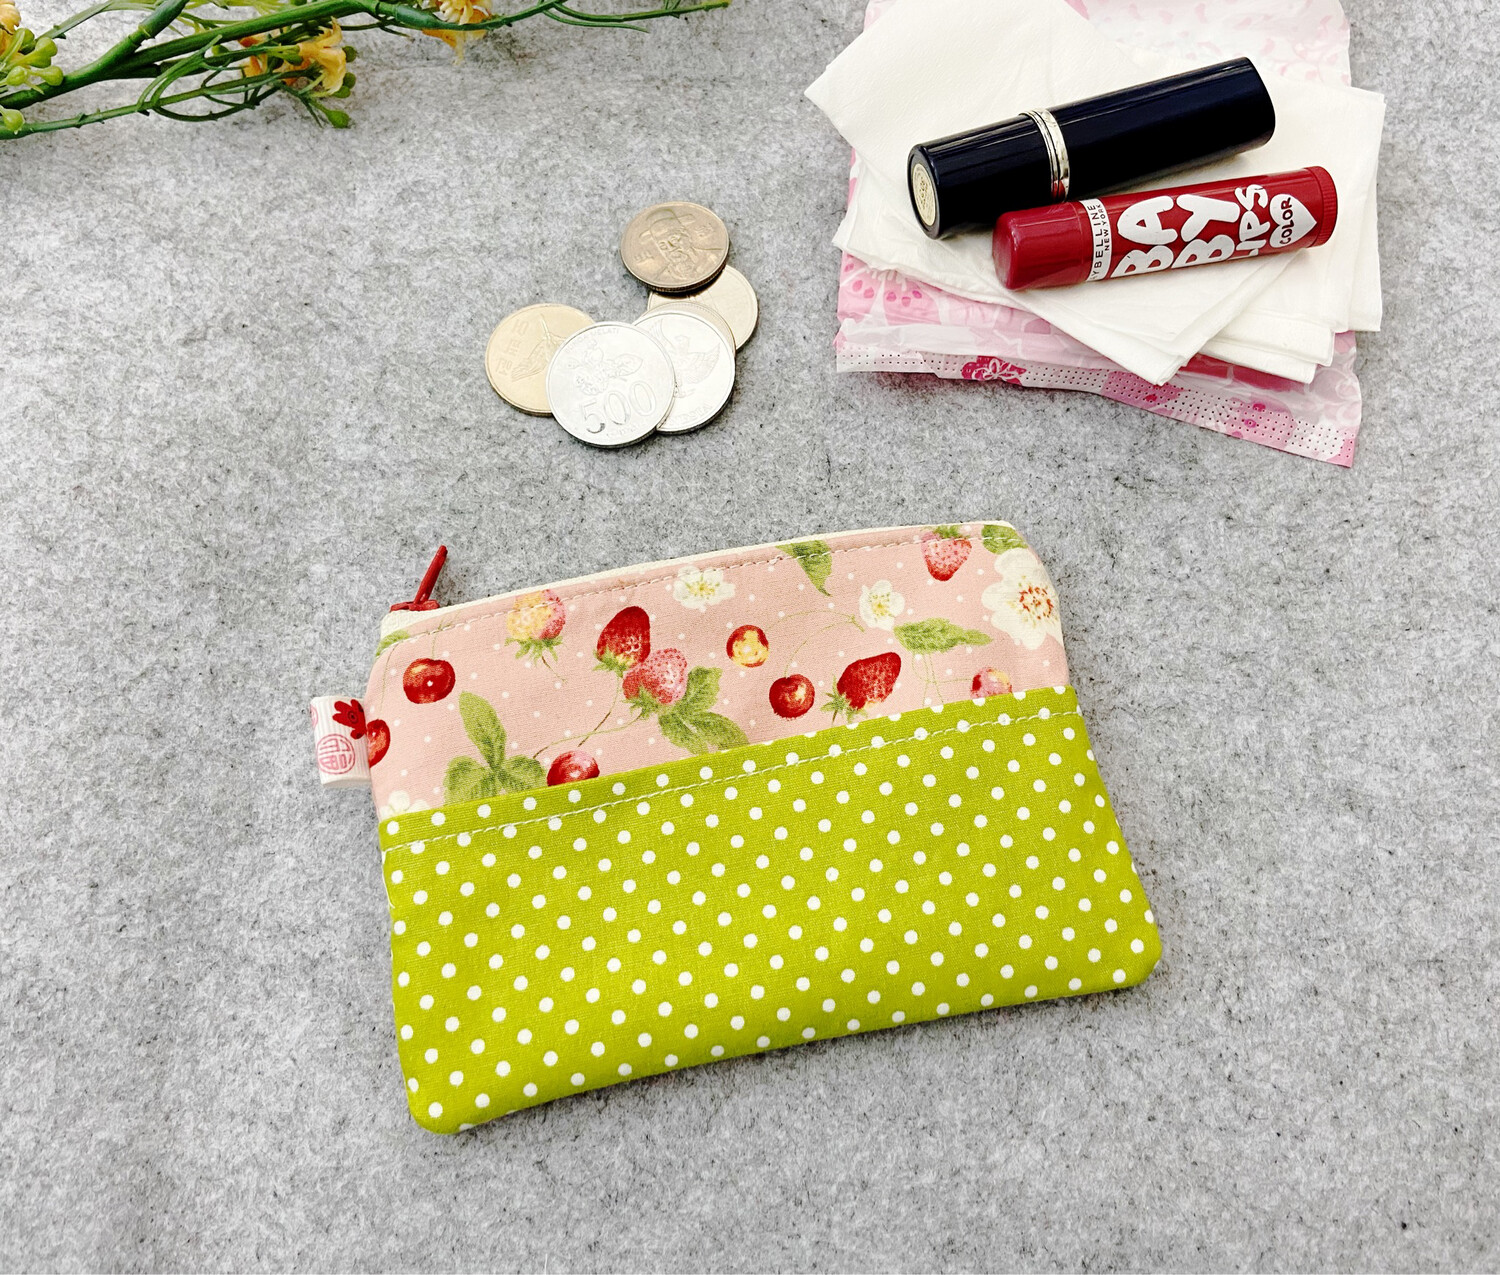 Mini Cute Zipper Pouch with Tissue Holder - Pink Strawberry Polkadots